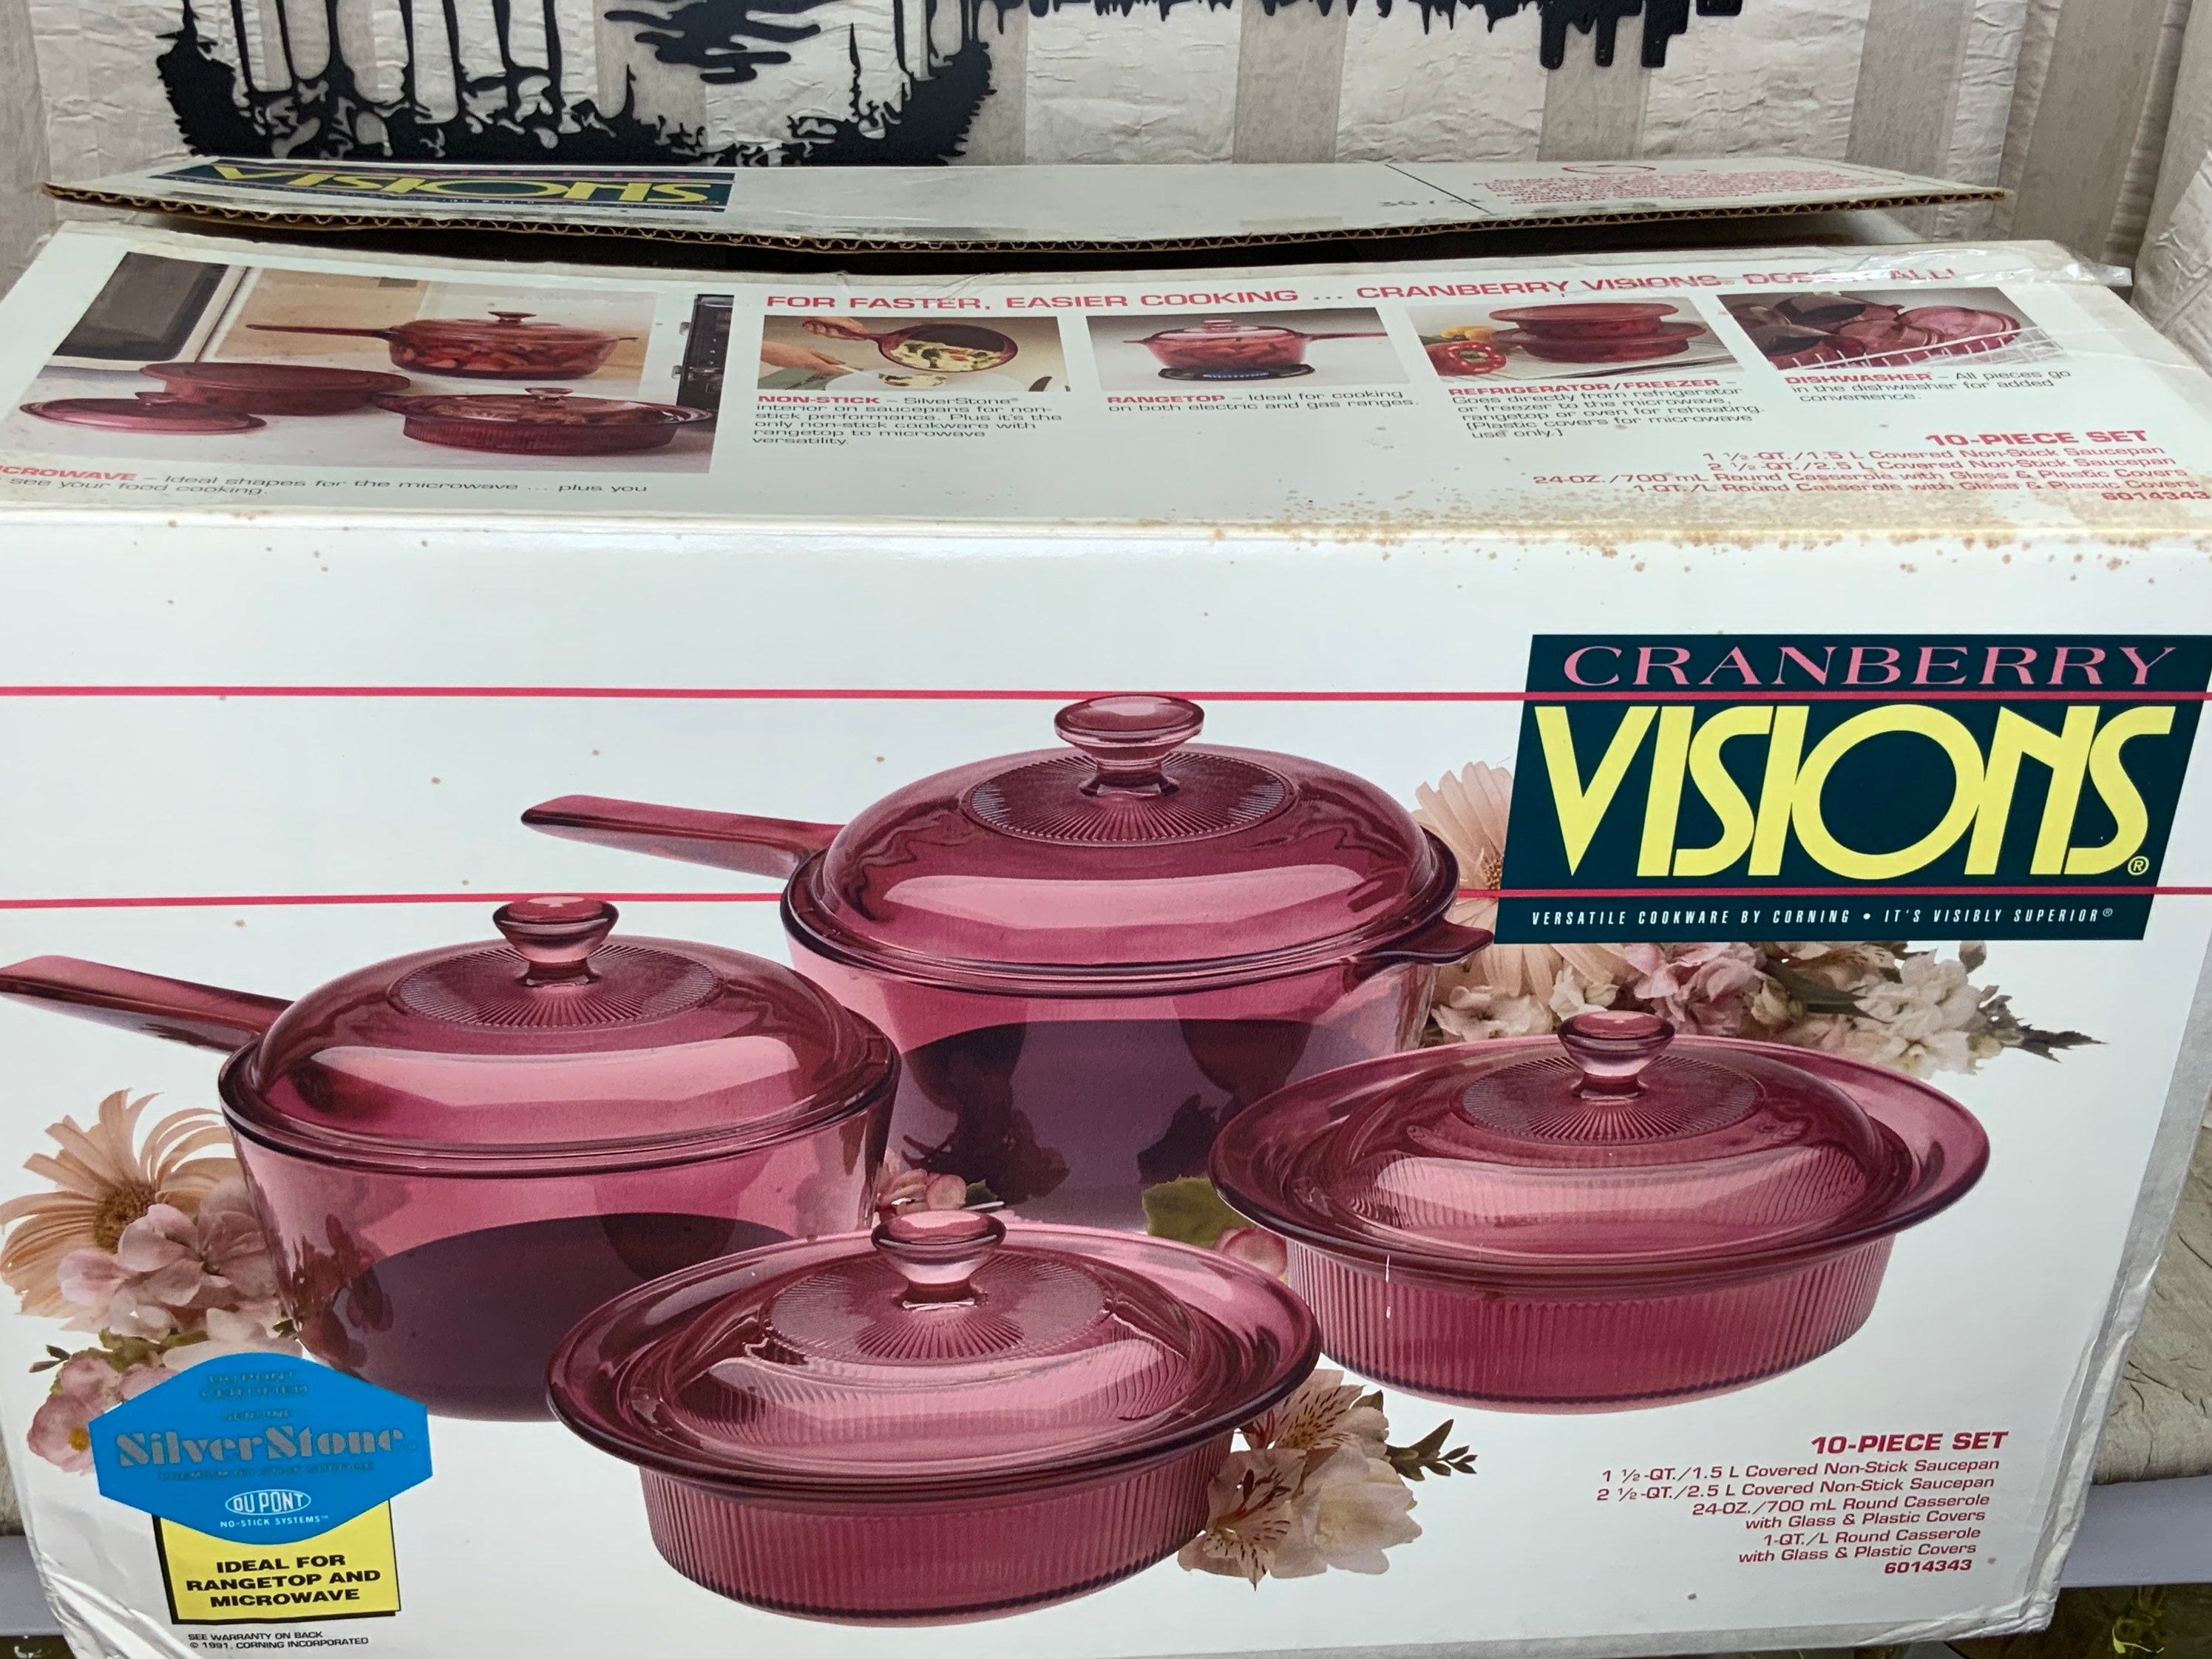 8 Pieces Set of Lidded Pyrex Vision Corning Ware-cooking Sets, Casserole Set,  Skillet Set, Glass Wares,dinnerware 2.5L, 1.5L,1L And750ml 